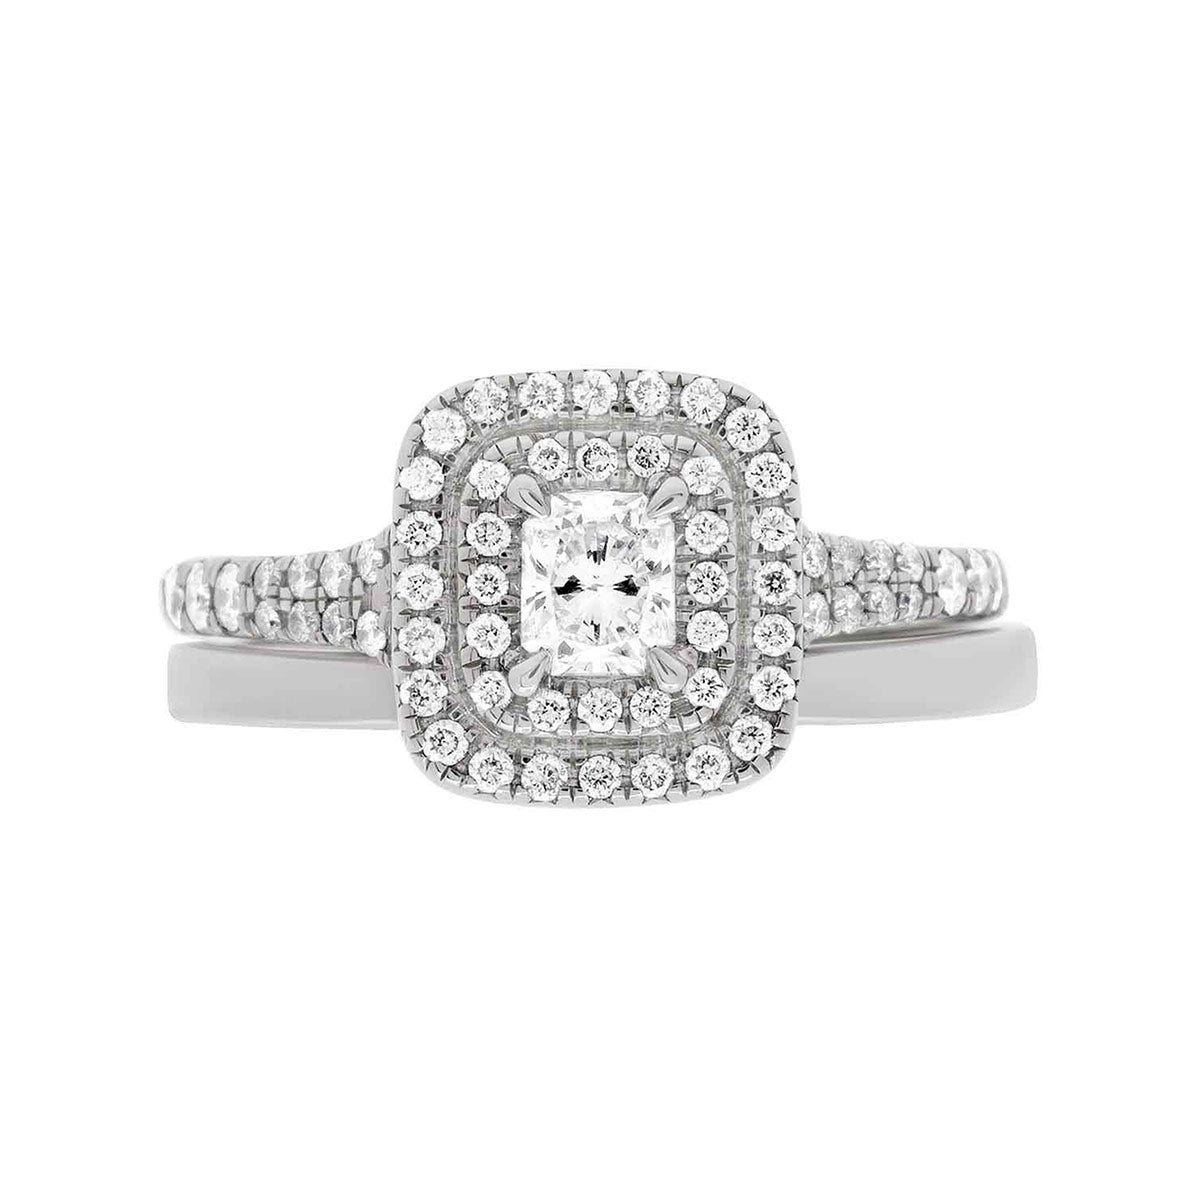 Double Halo Cushion Cut Diamond Ring in white gold with a matching white gold wedding ring